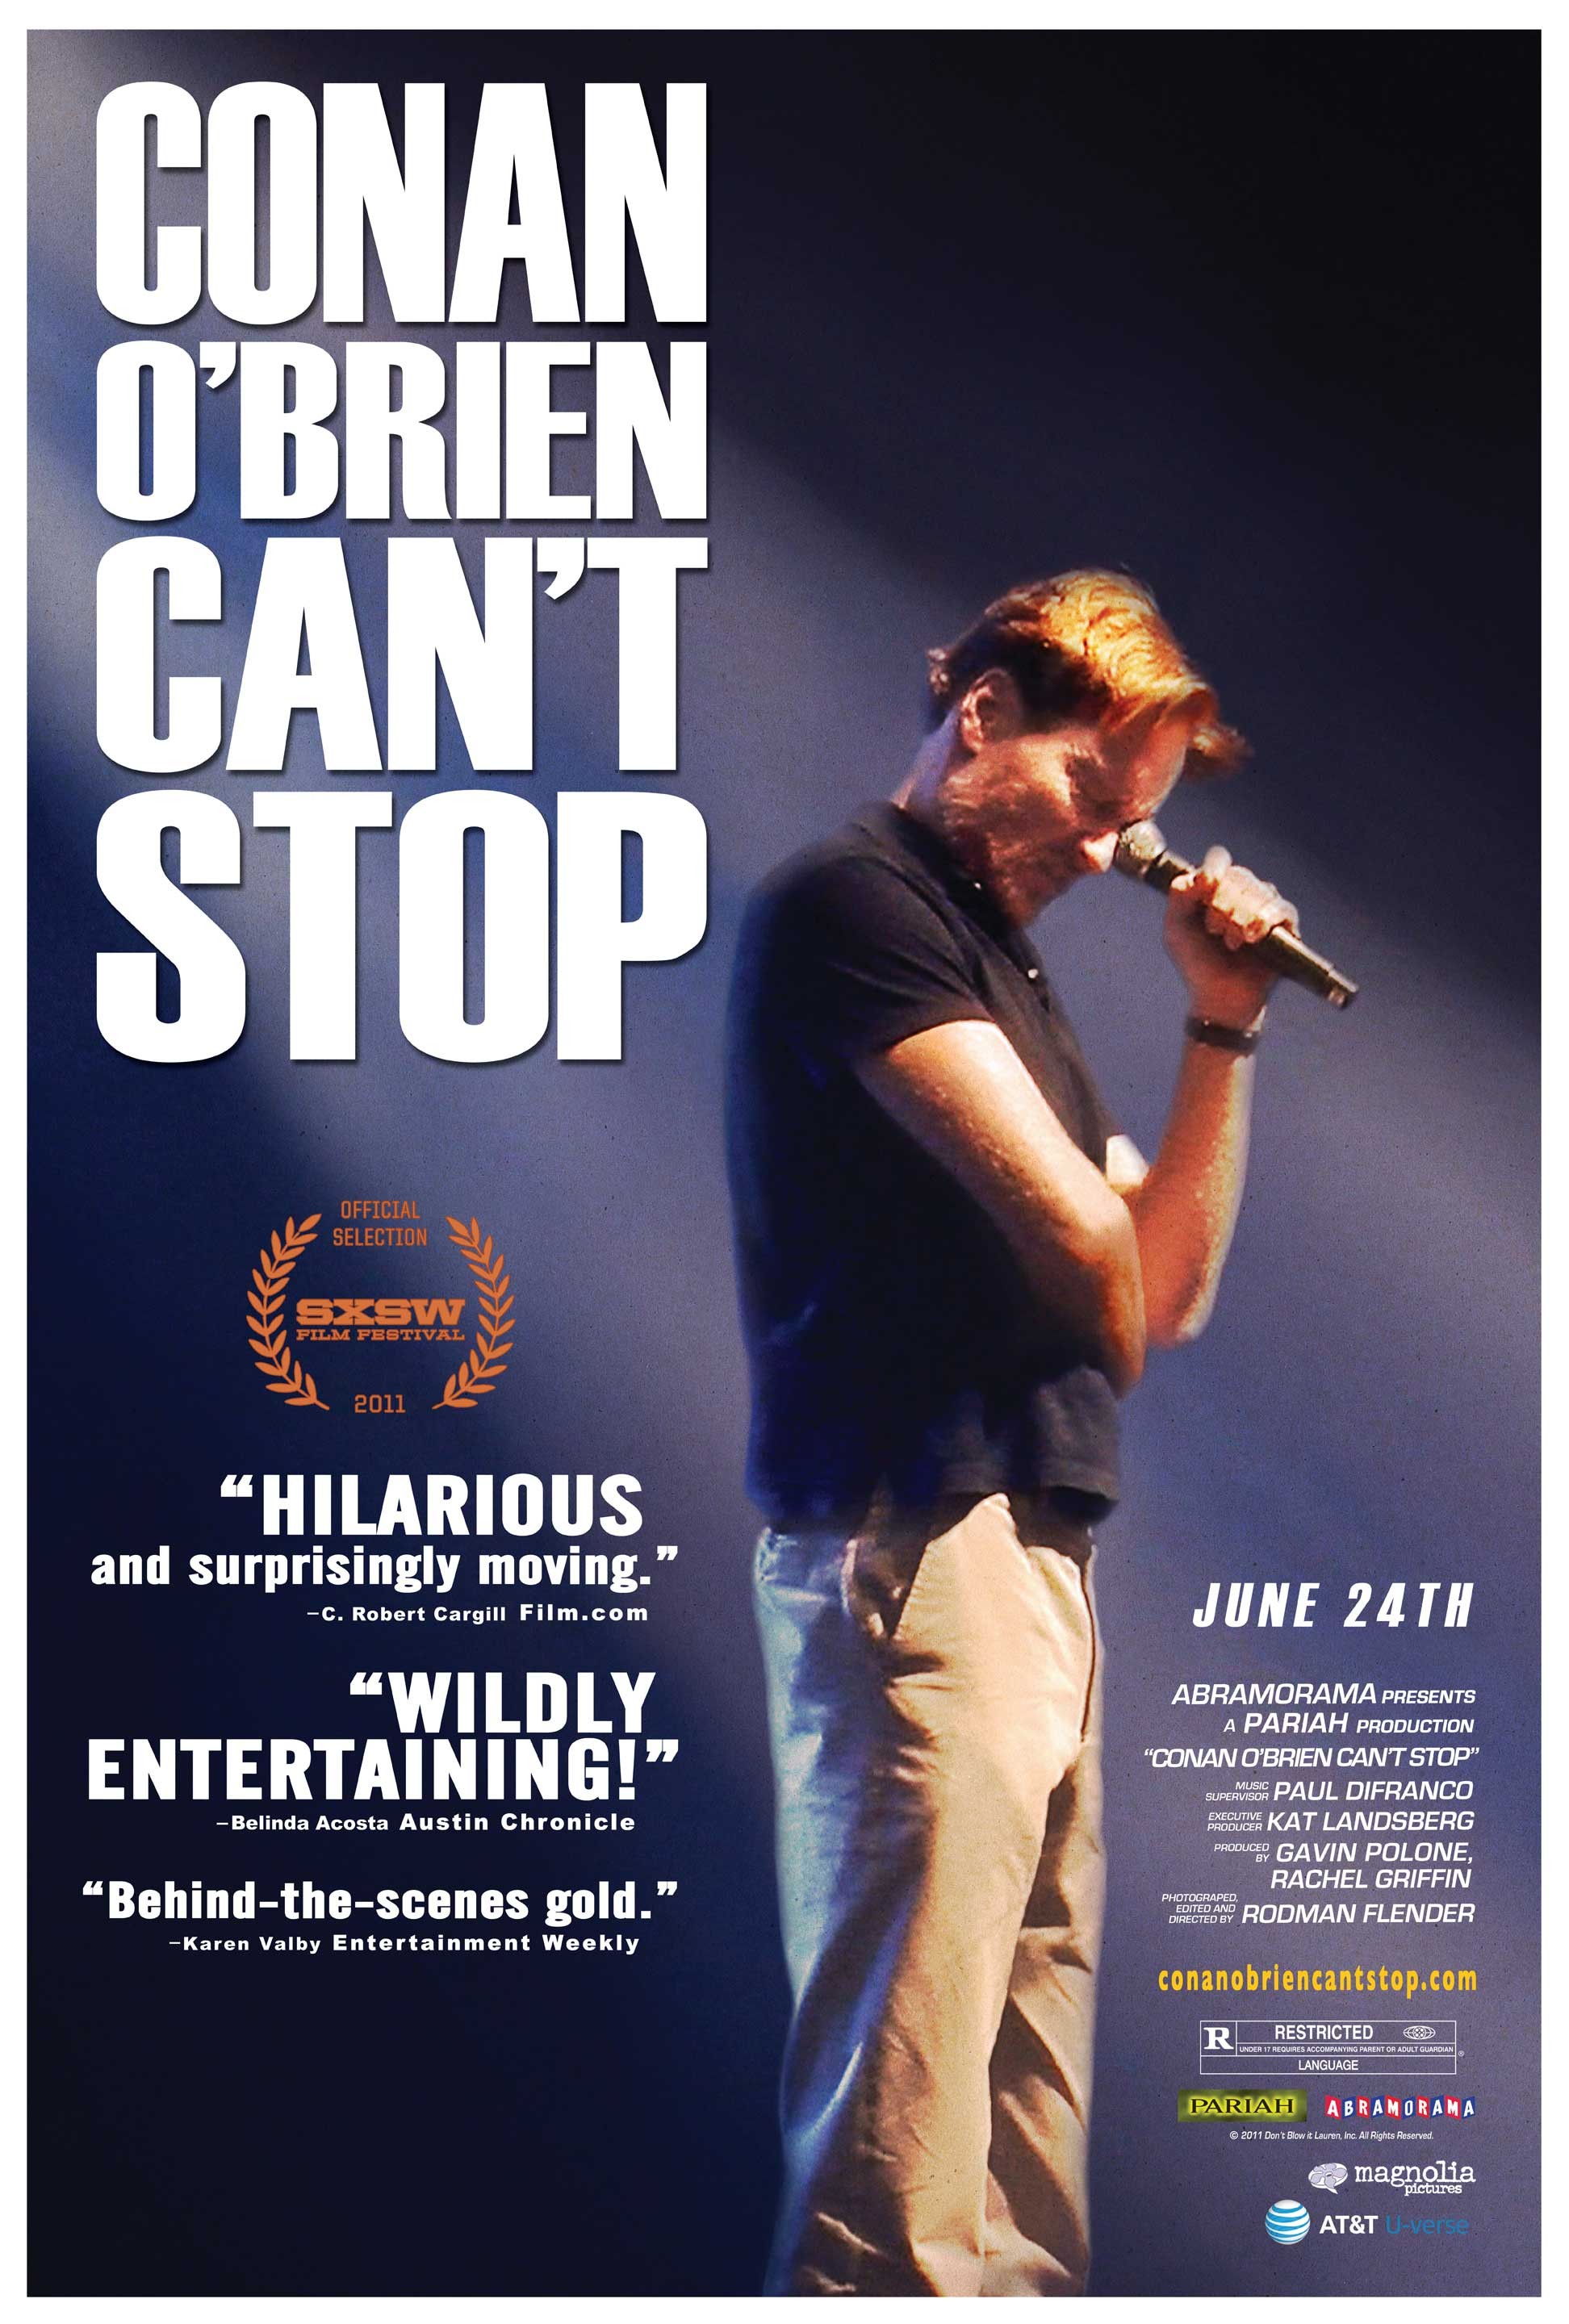 Mega Sized Movie Poster Image for Conan O'Brien Can't Stop 